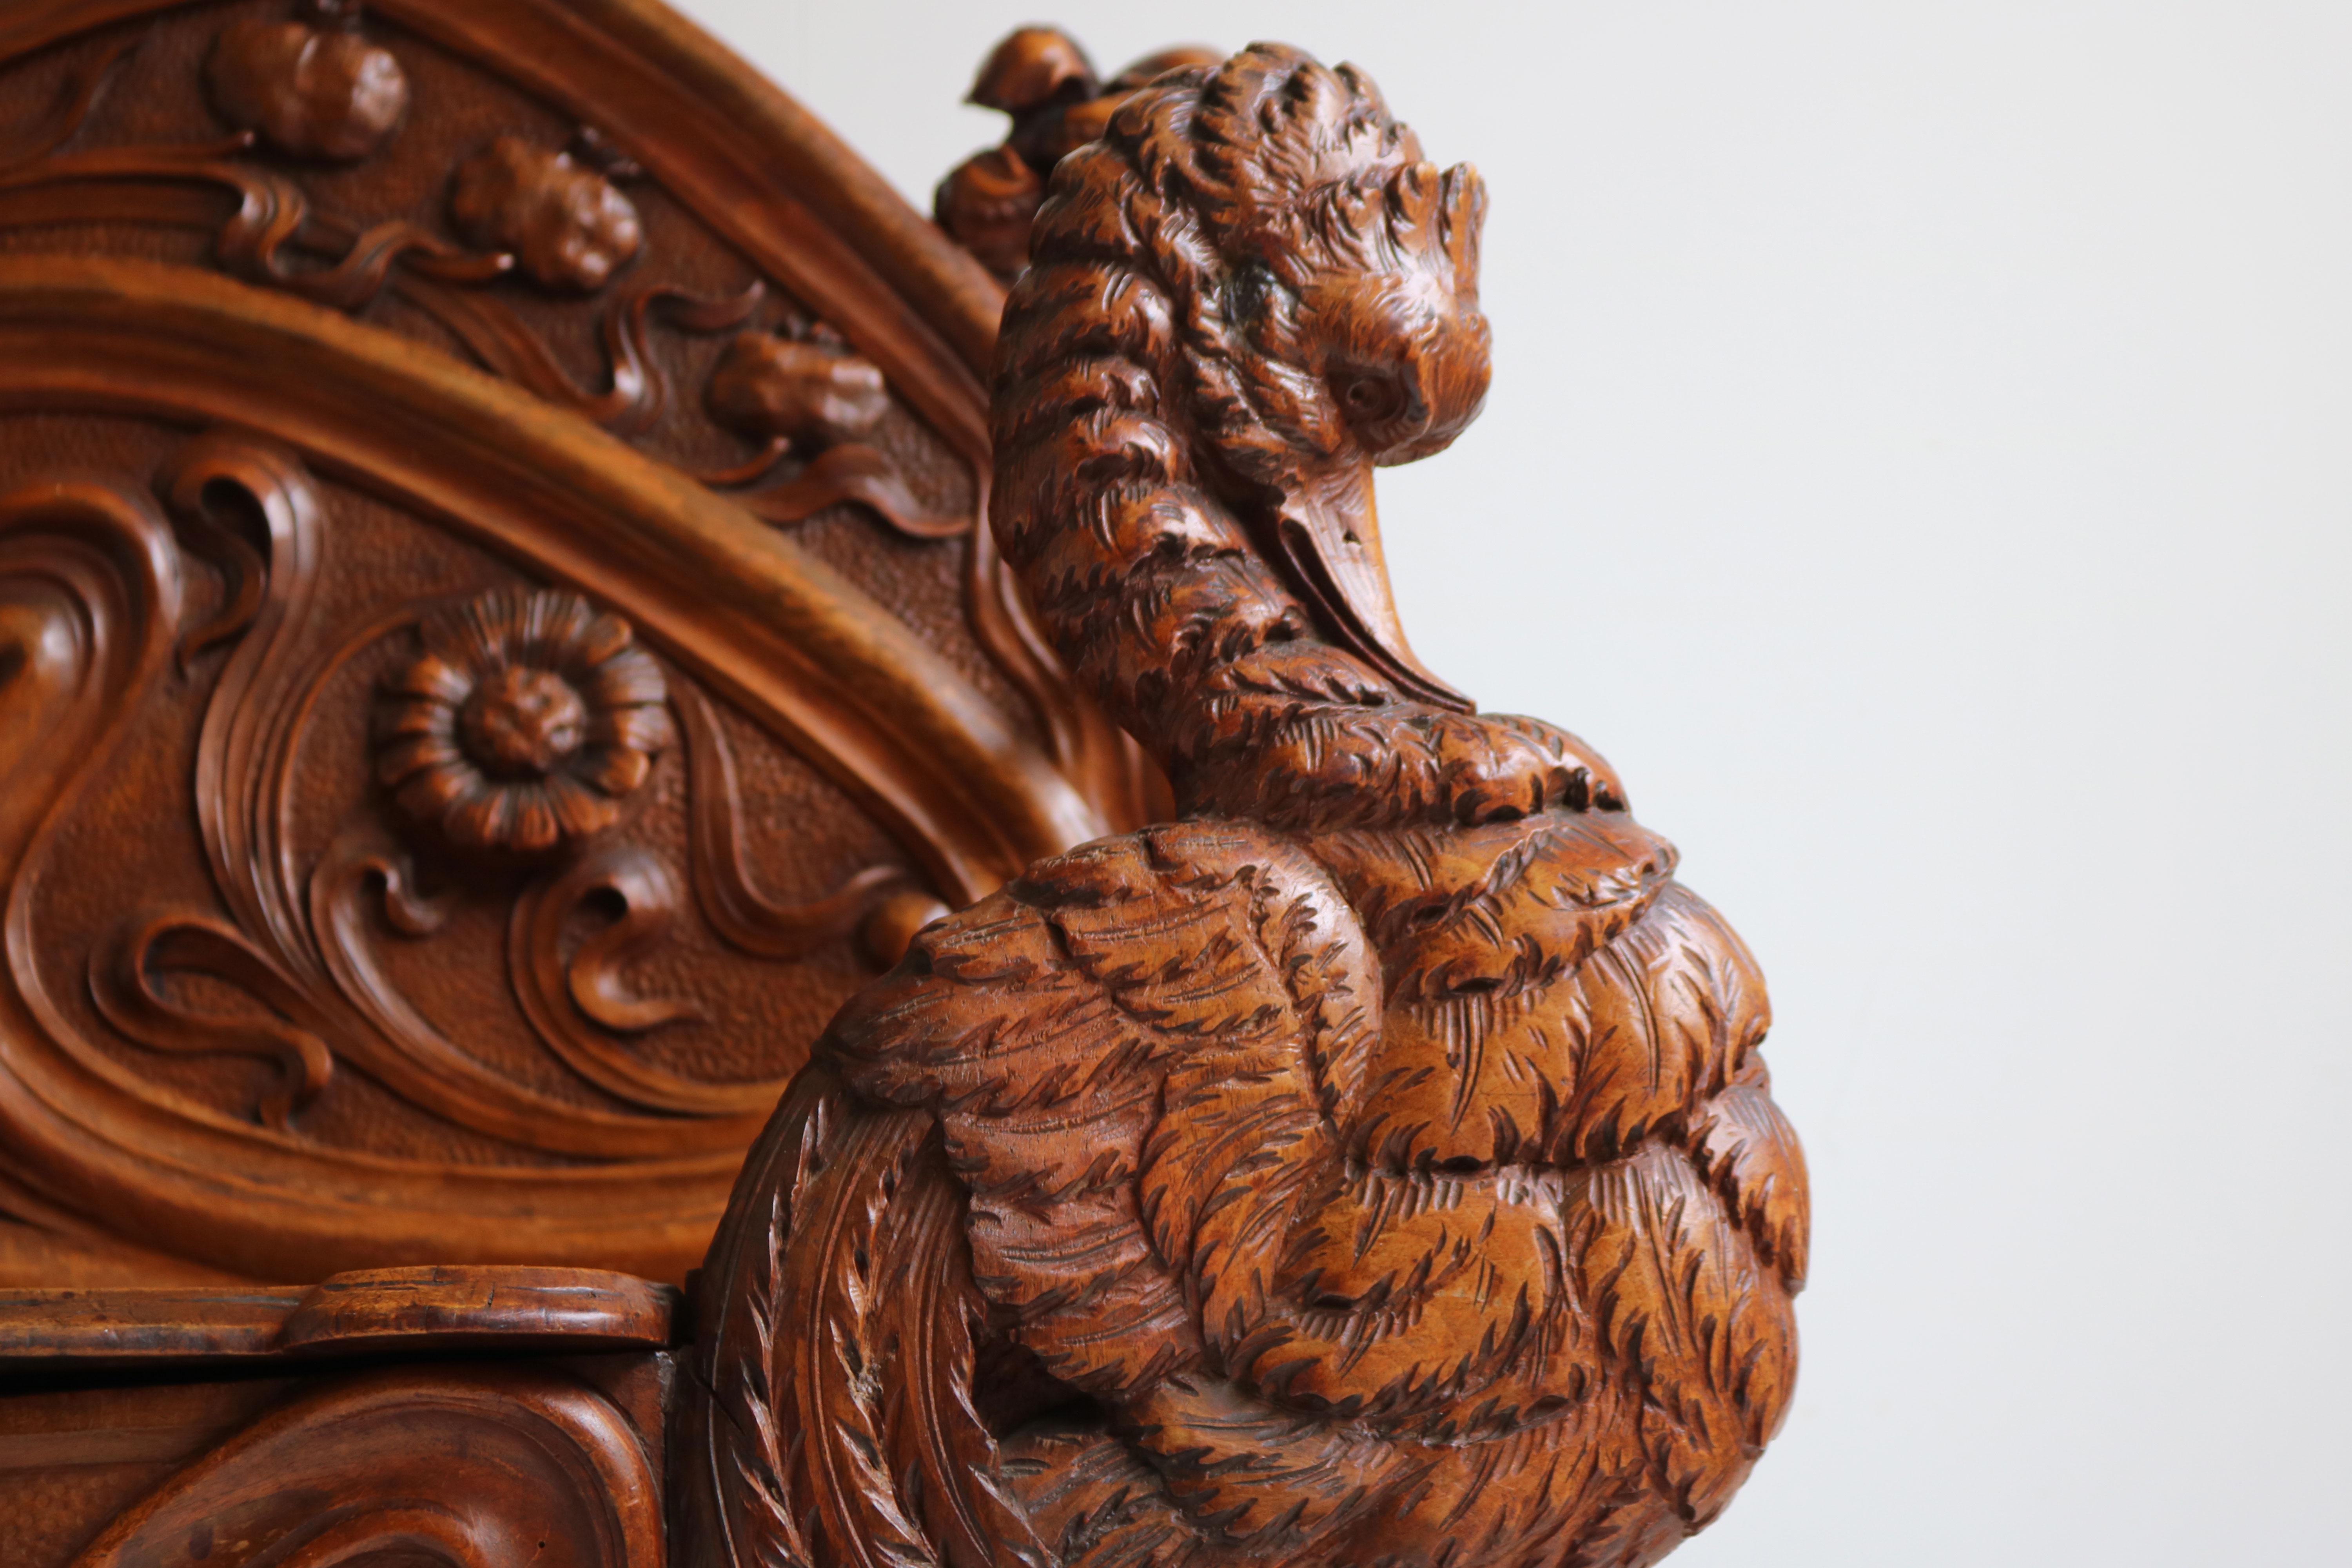 Early 20th Century Rare French Art Nouveau / Jugendstil Hall Bench Attributed to Louis Majorelle